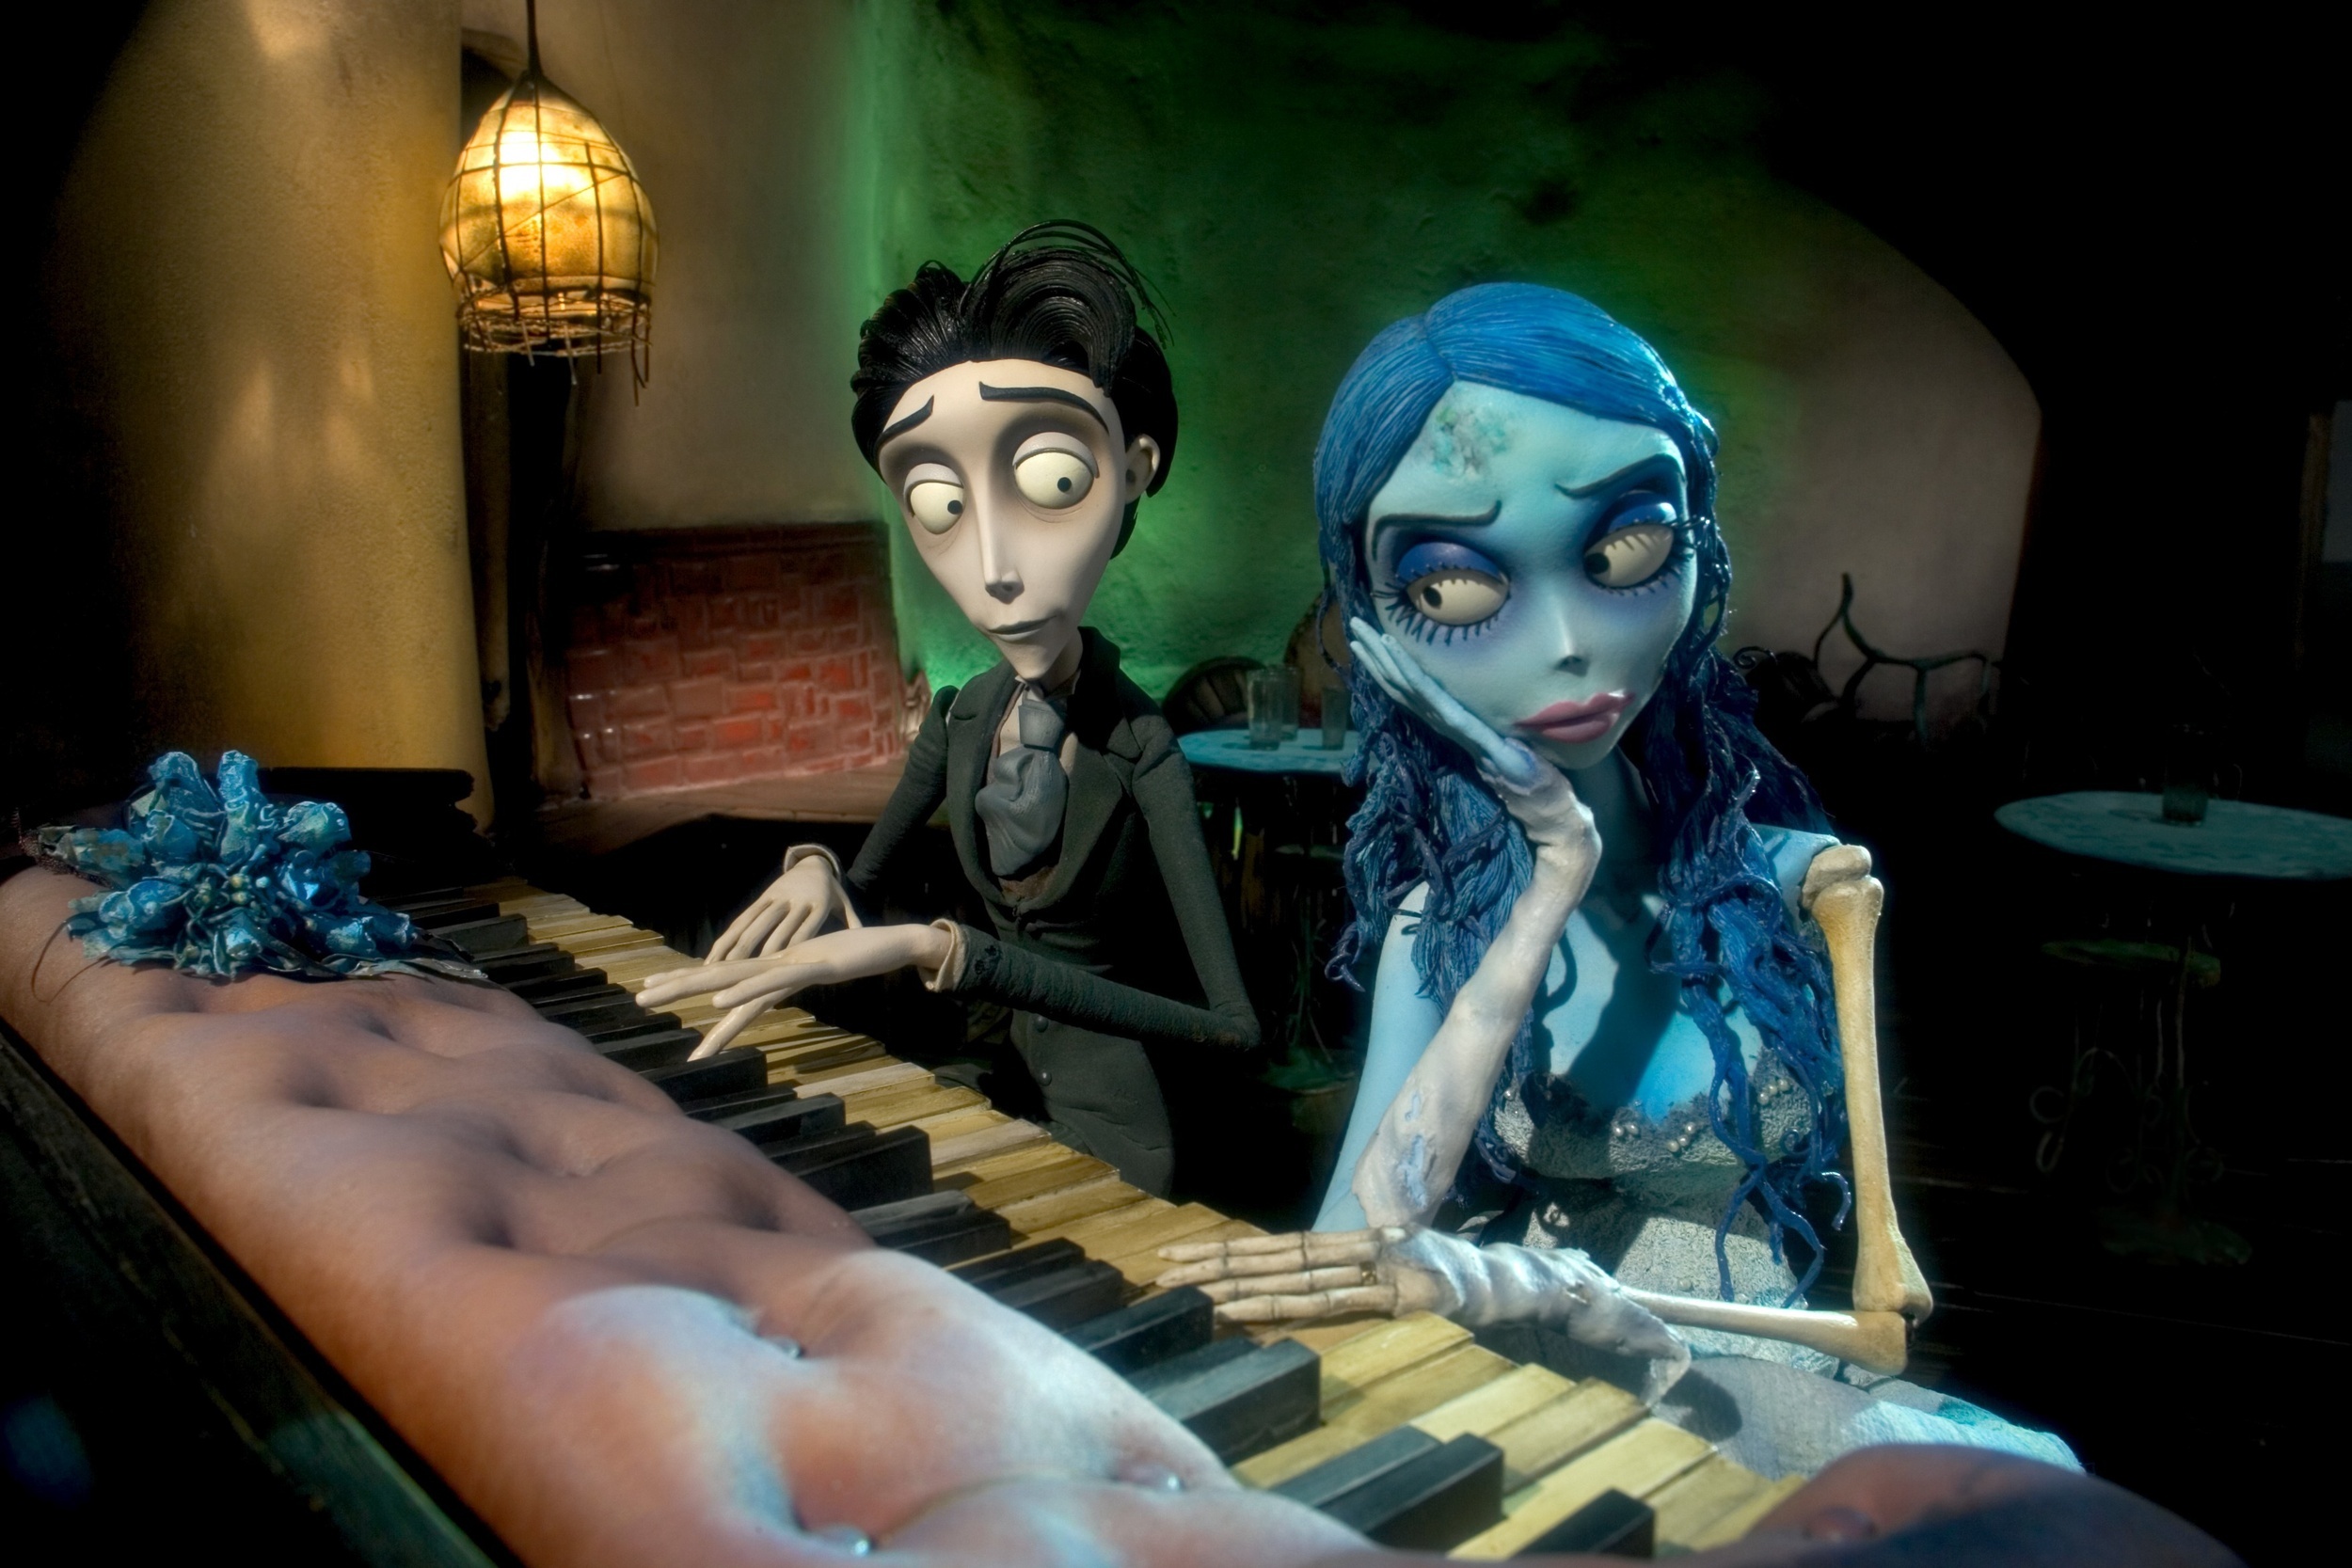 <p>Director Tim Burton is known for his quirky and distinctive visual style, which is on full display in <em>Corpse Bride</em>. When a groom practices his wedding vows in front of a deceased woman’s grave, she comes back to life and thinks they are married. As Burton’s first animated feature as director, it is imbued with his quirkiness and signature gothic style, mainly through its character design. There is a bittersweet love story at its core, told with whimsy and depth.</p><p>You may also like: <a href='https://www.yardbarker.com/entertainment/articles/the_25_best_voice_actors_111623/s1__39418511'>The 25 best voice actors</a></p>